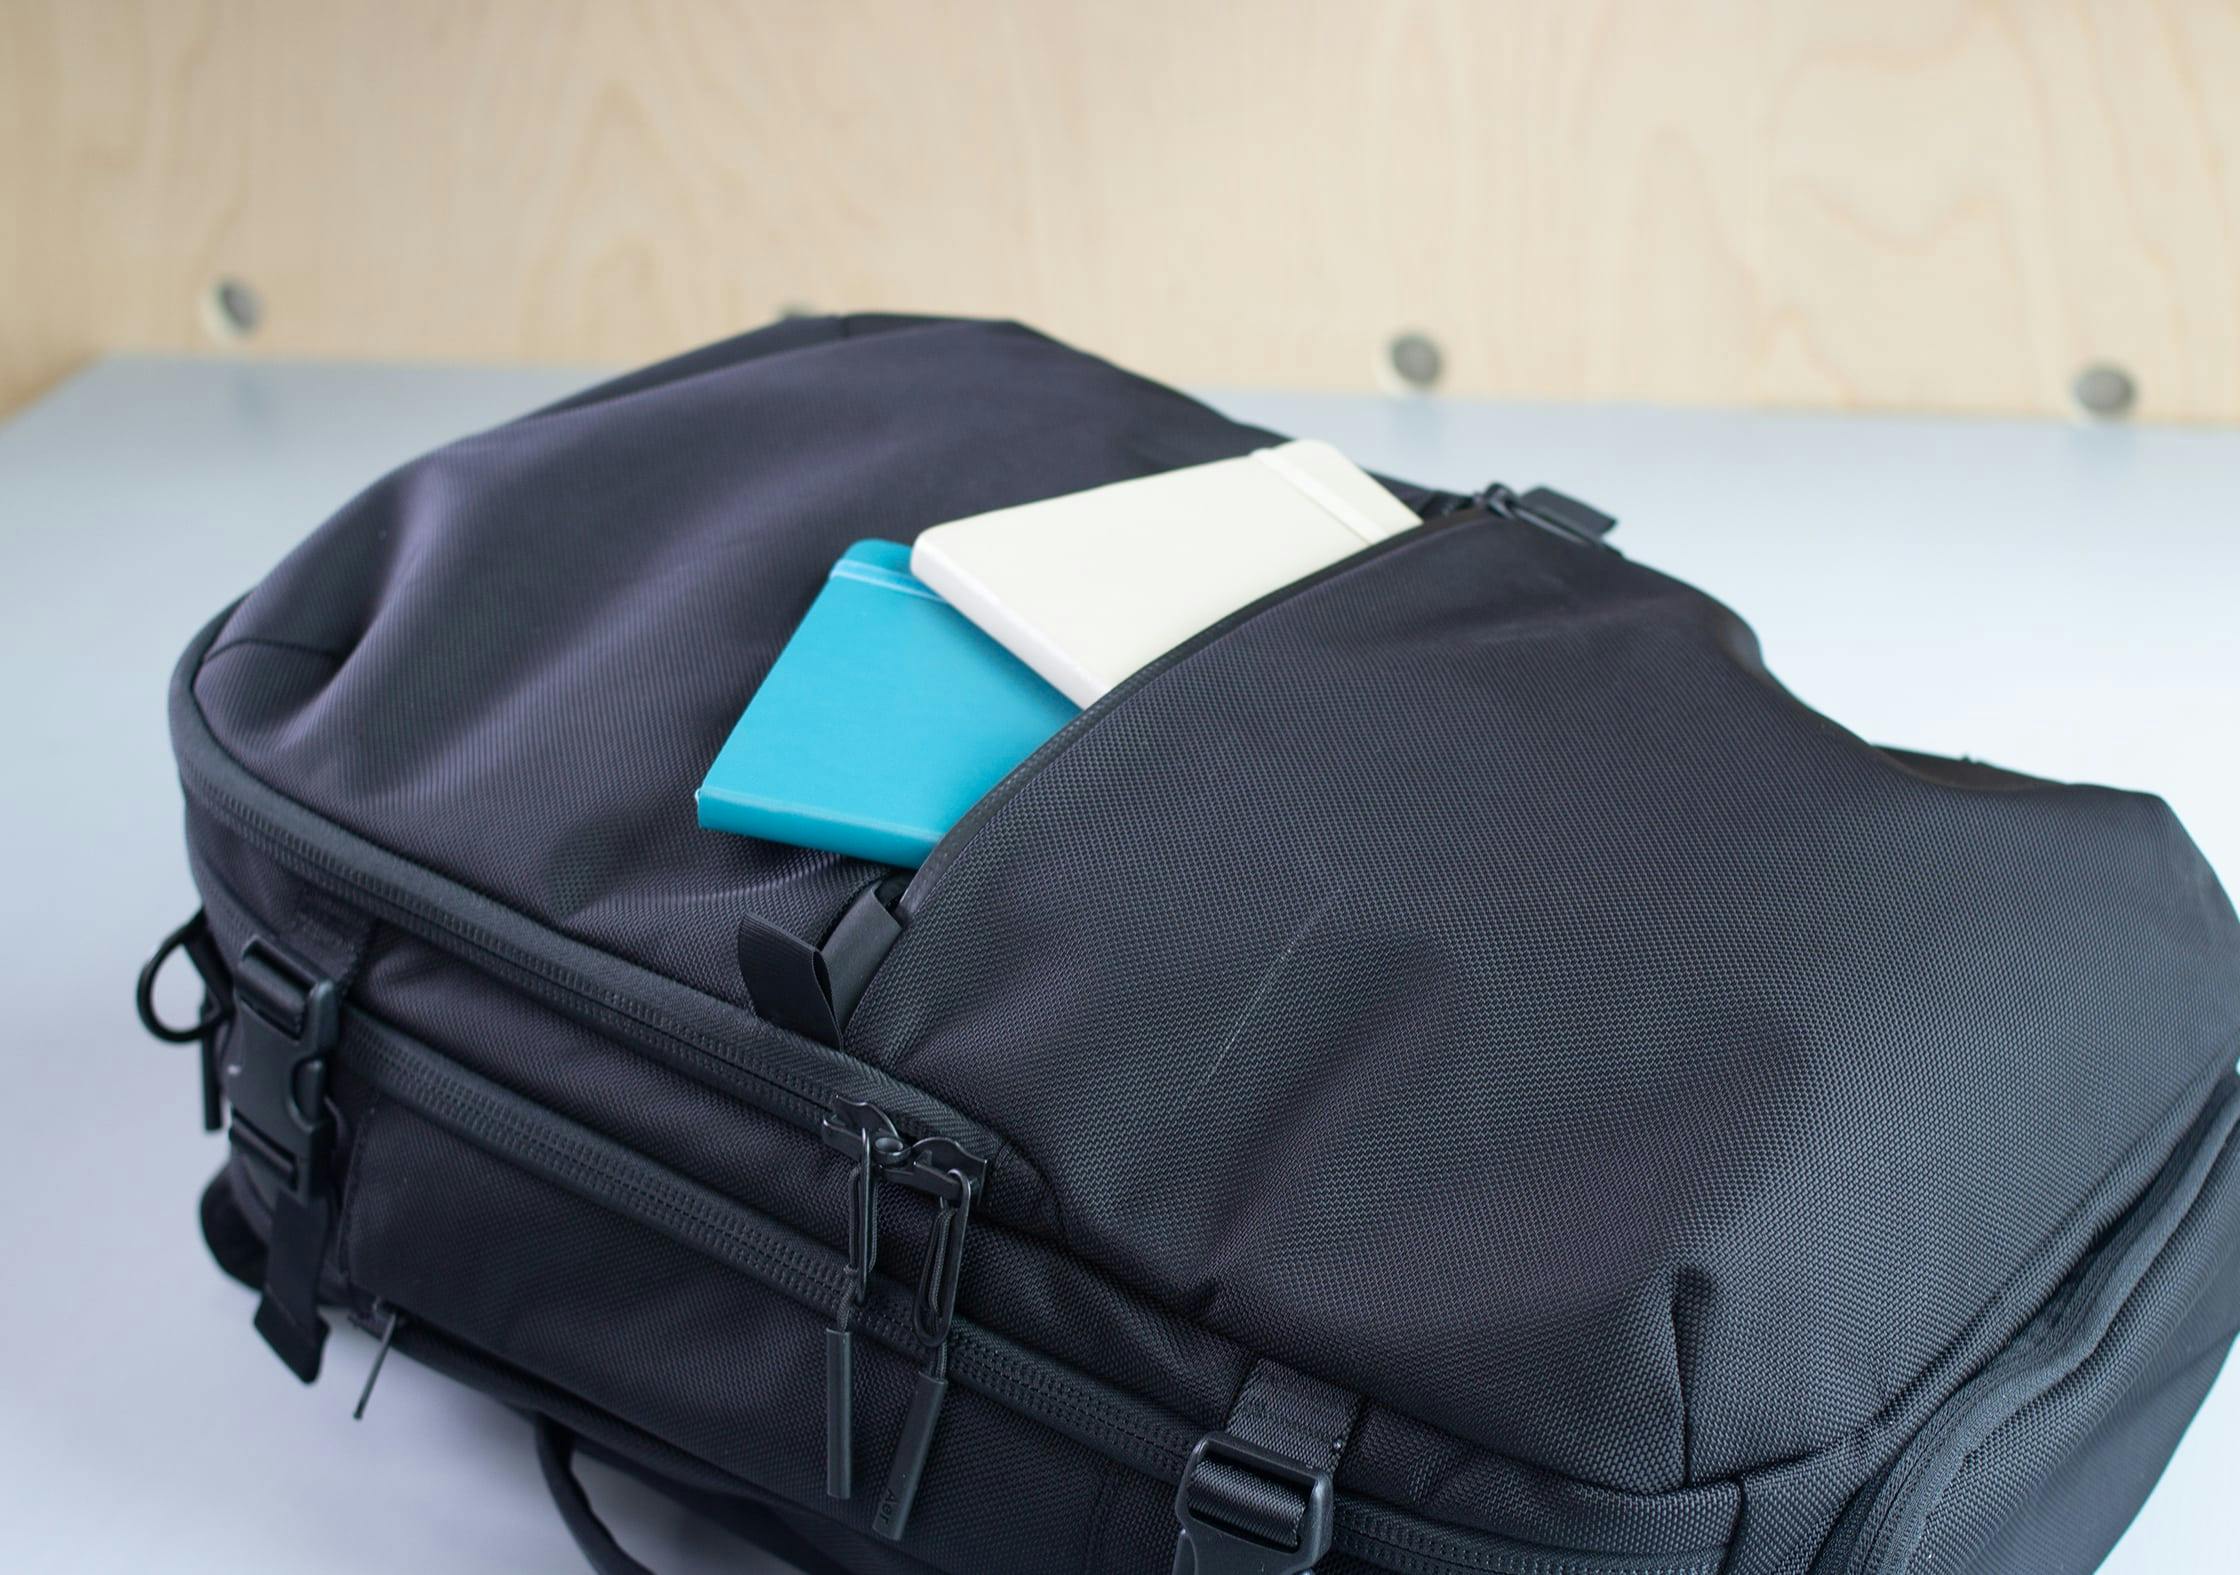 Aer Travel Pack 2 Review (One Bag Update) Pack Hacker